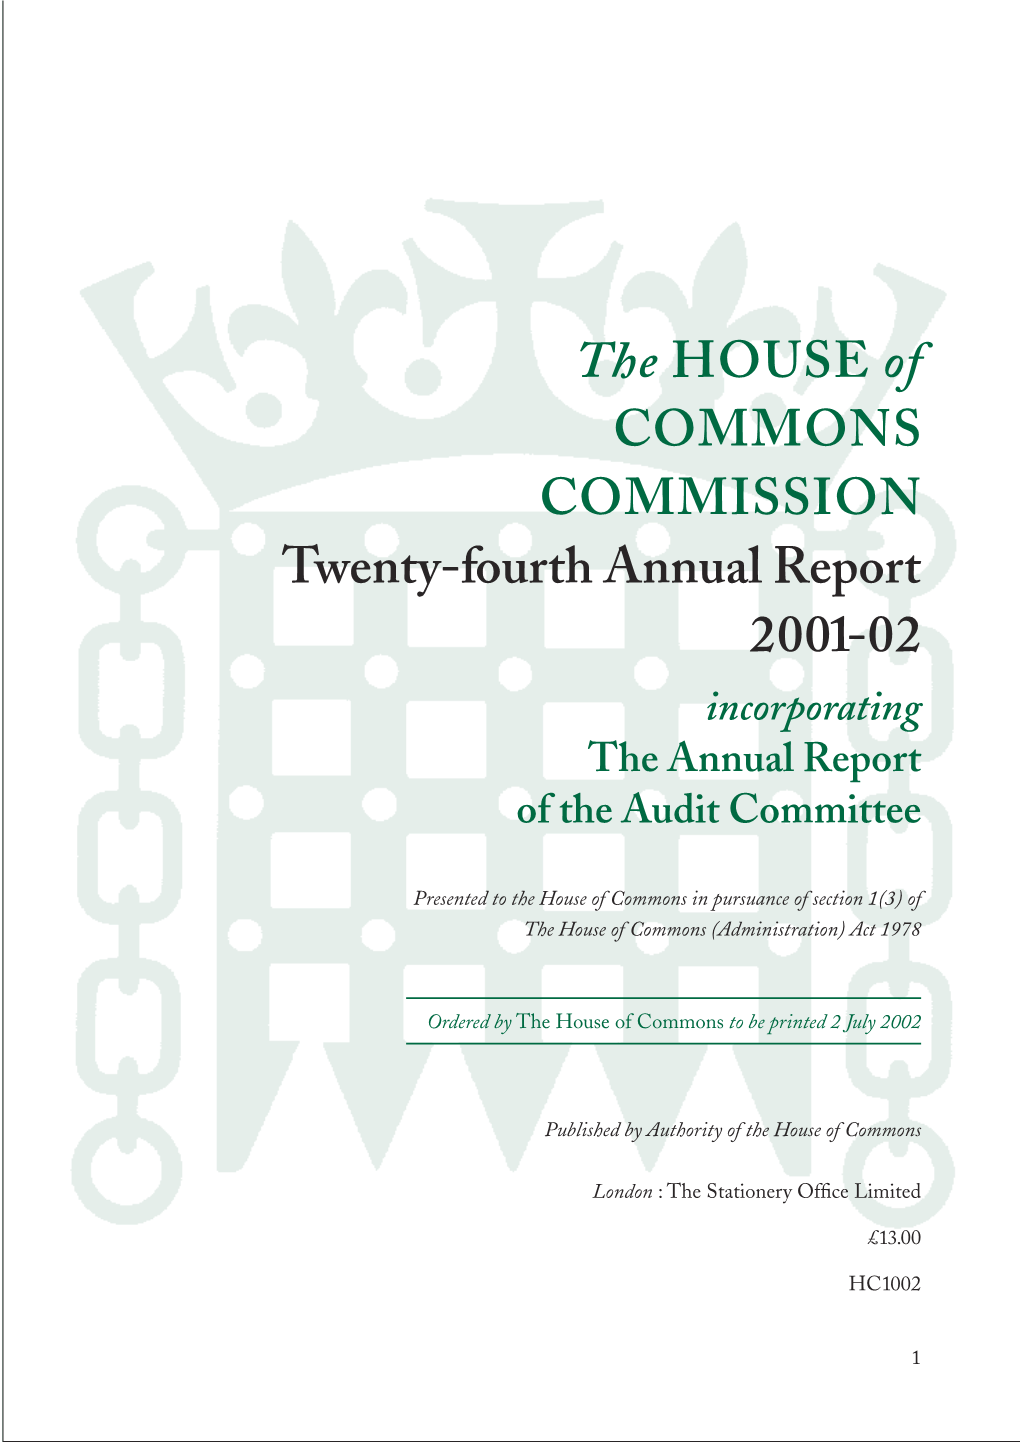 The HOUSE of COMMONS COMMISSION Twenty-Fourth Annual Report 2001-02 Incorporating the Annual Report of the Audit Committee